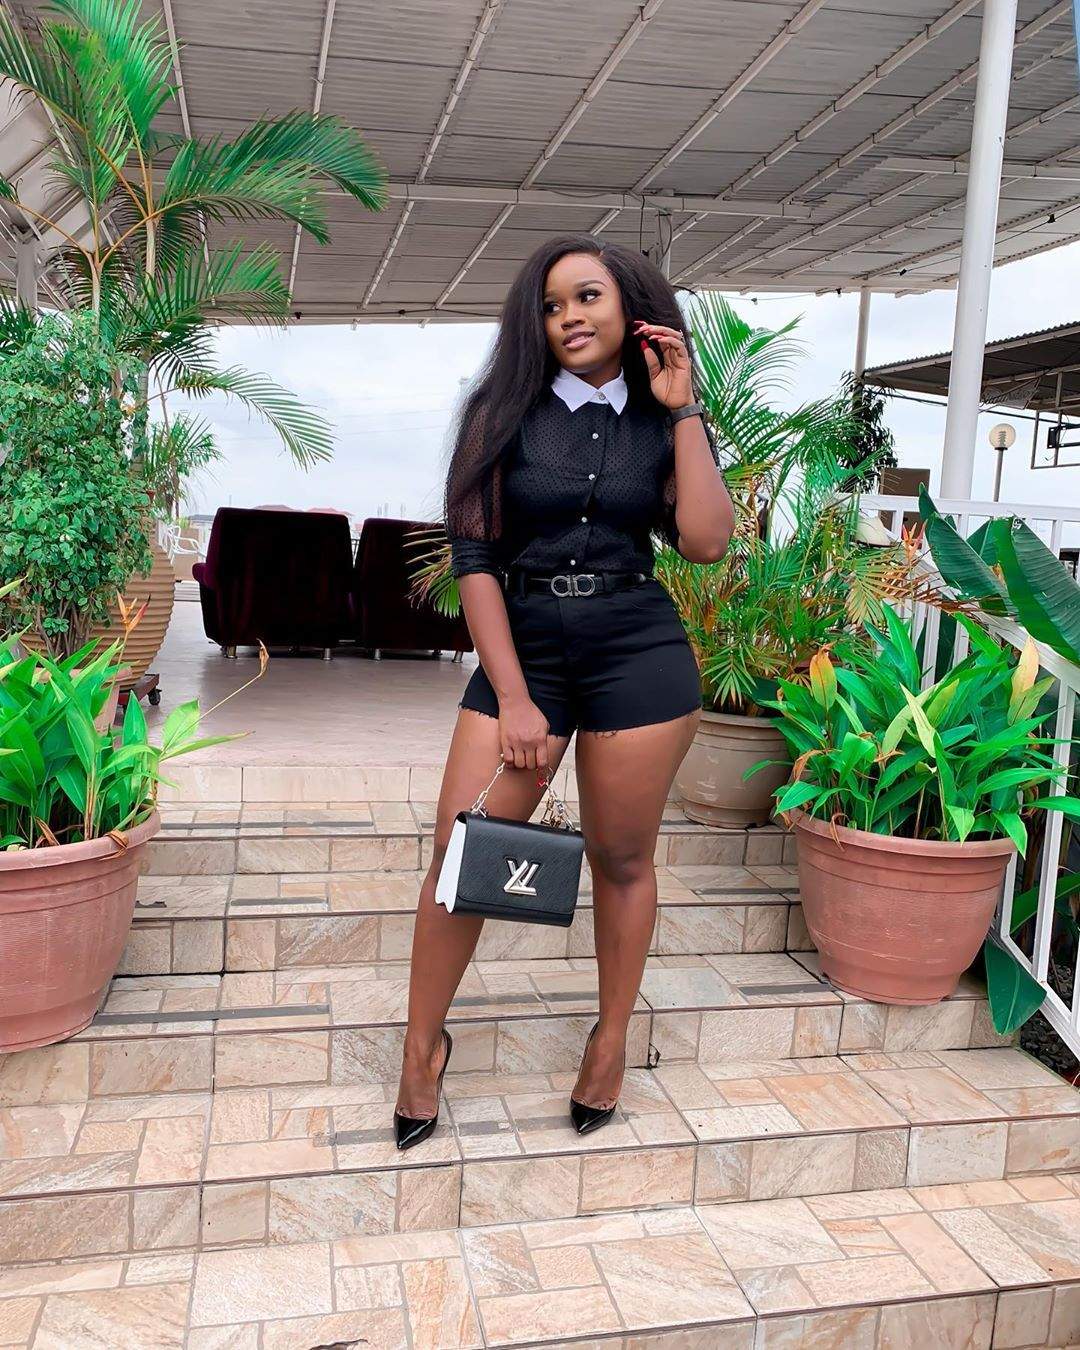 Cee-C looks smoking hot as she steps out in bum shorts (Photos)